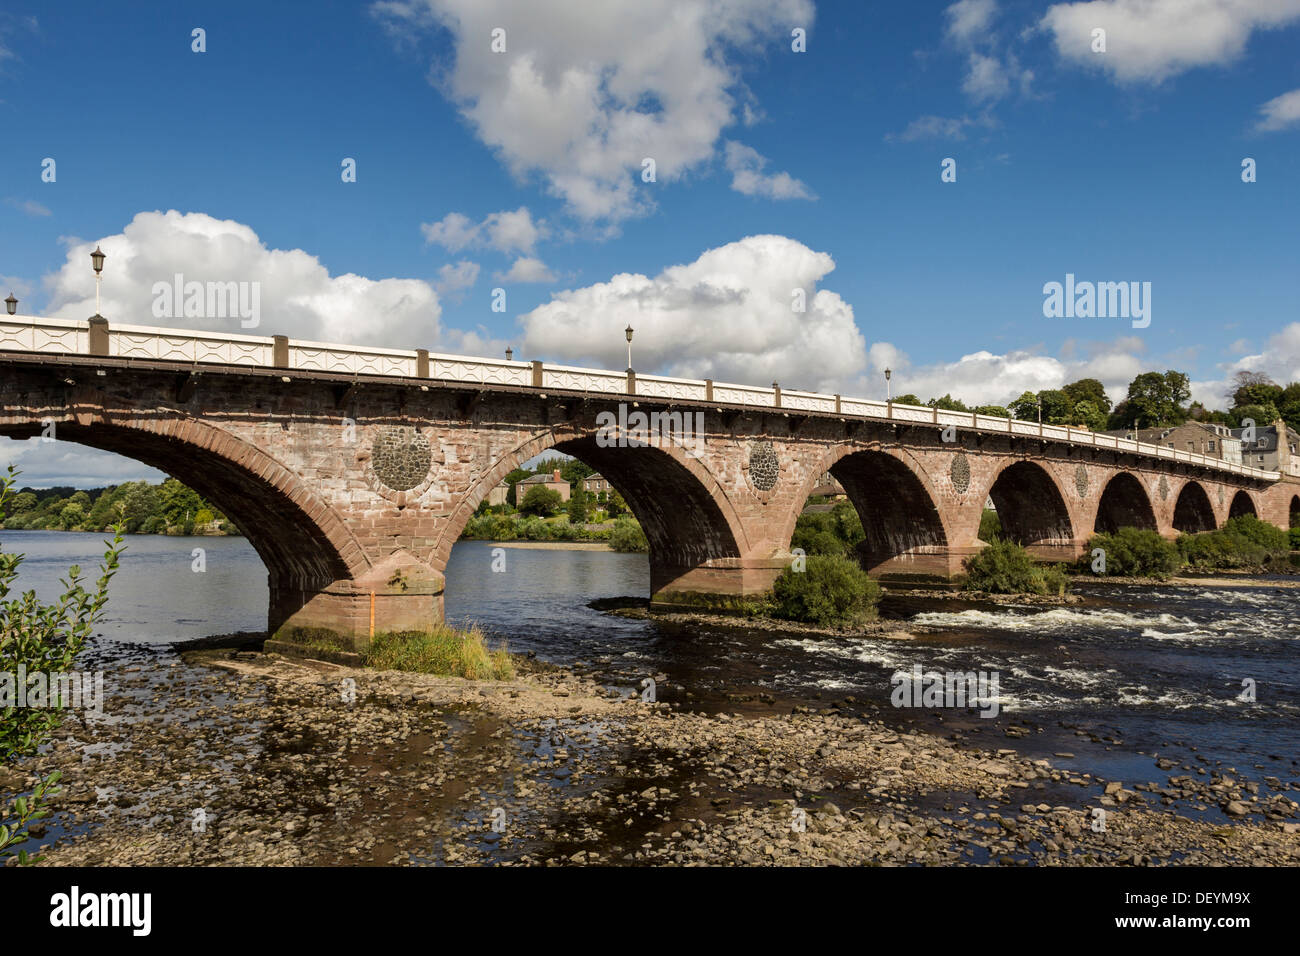 SMEATONS OLD ROAD BRIDGE OVER THE RIVER TAY IN PERTH CITY SCOTLAND Stock Photo